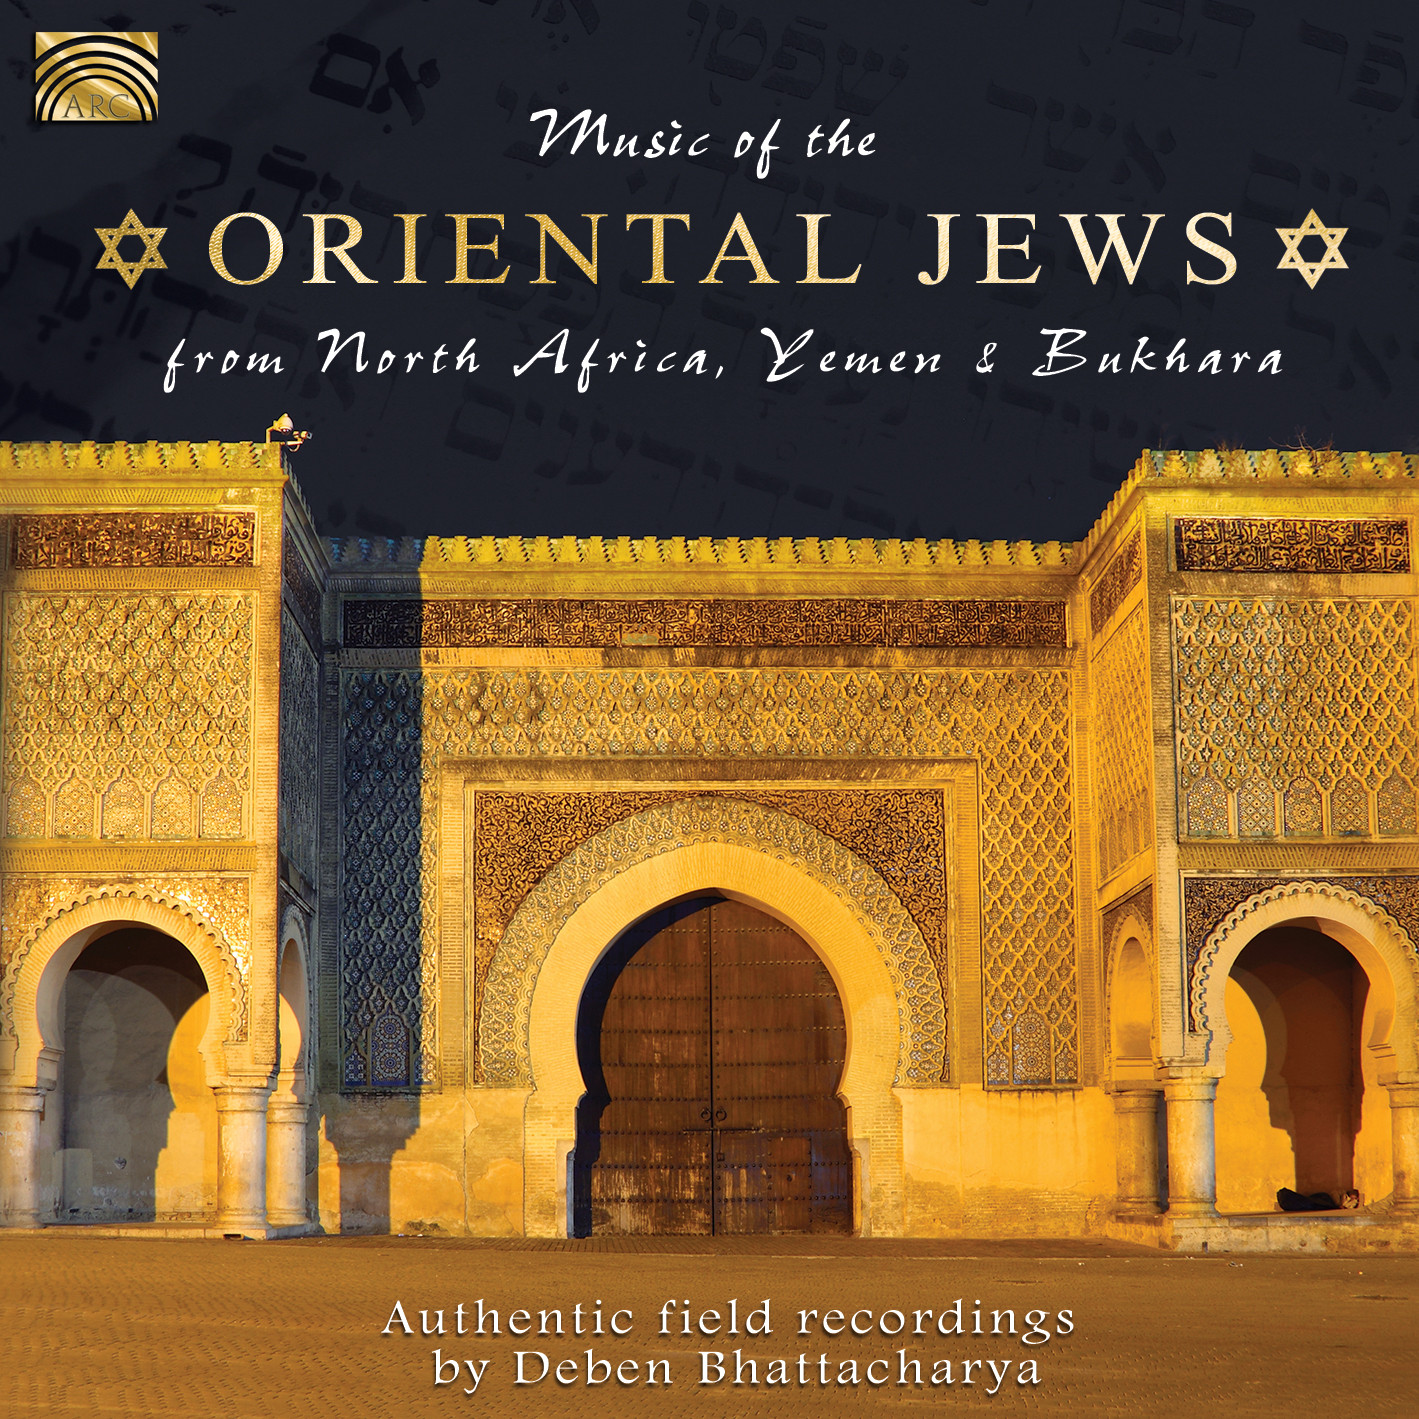 EUCD2513 Music of the Oriental Jews from North Africa, Yemen & Bakhar